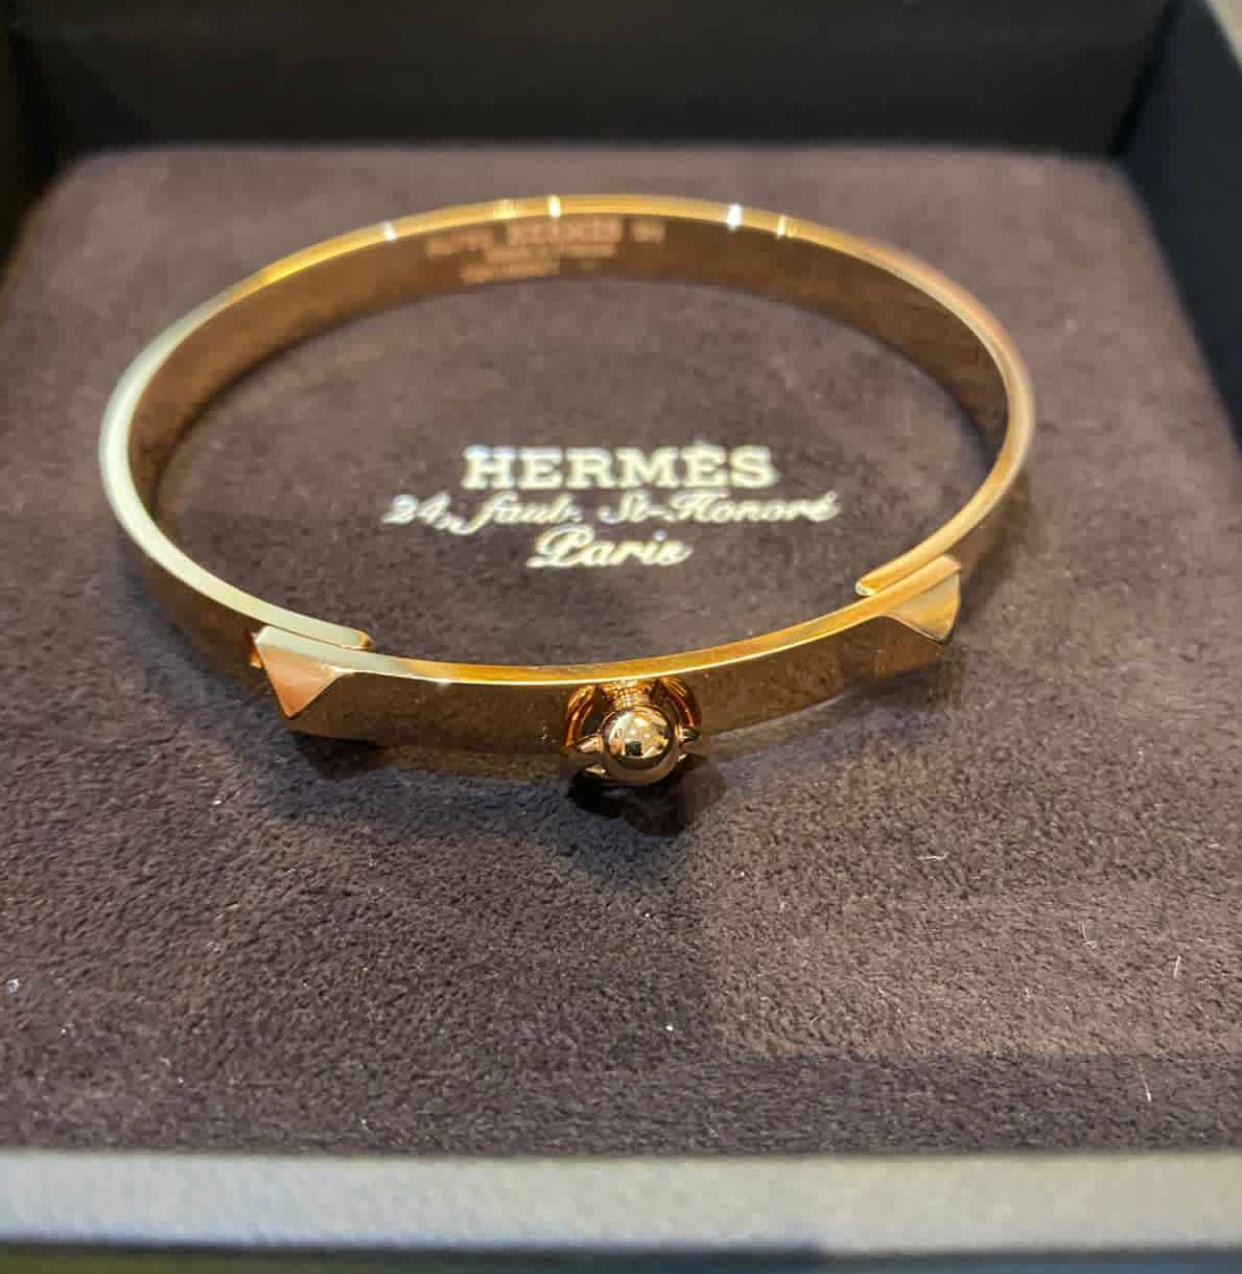 Hermes Collier de Chien bracelet
Small Size
18K Rose Gold
Comes with original box and certificate